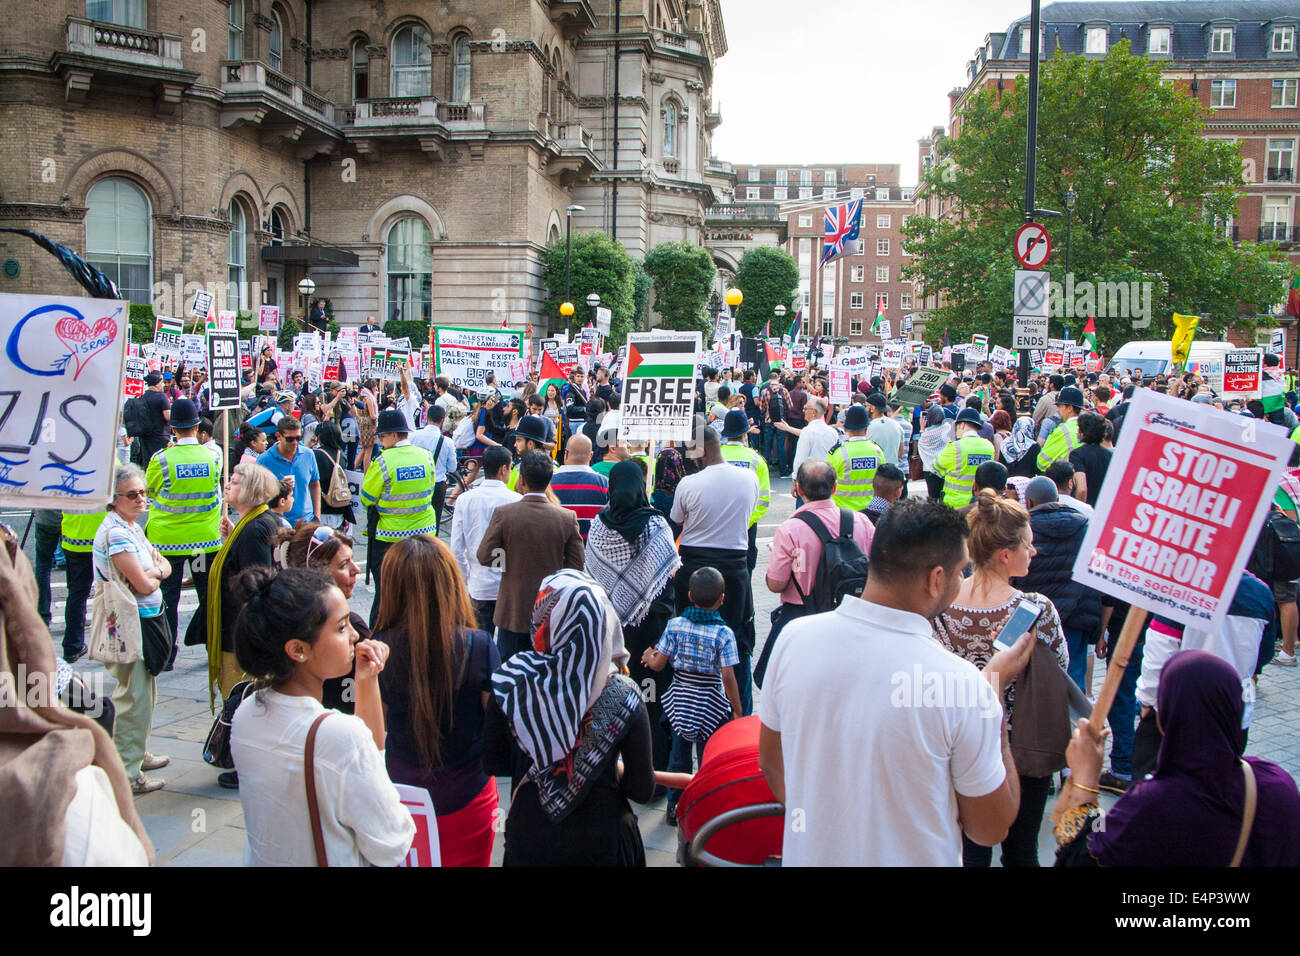 London, UK. 15th July, 2014. Thousands of Palestinians and their supporters demonstrate outside the BBC's headquarters against an alleged pro-Israeli bias in their coverage of Palestinian affairs. Credit:  Paul Davey/Alamy Live News Stock Photo